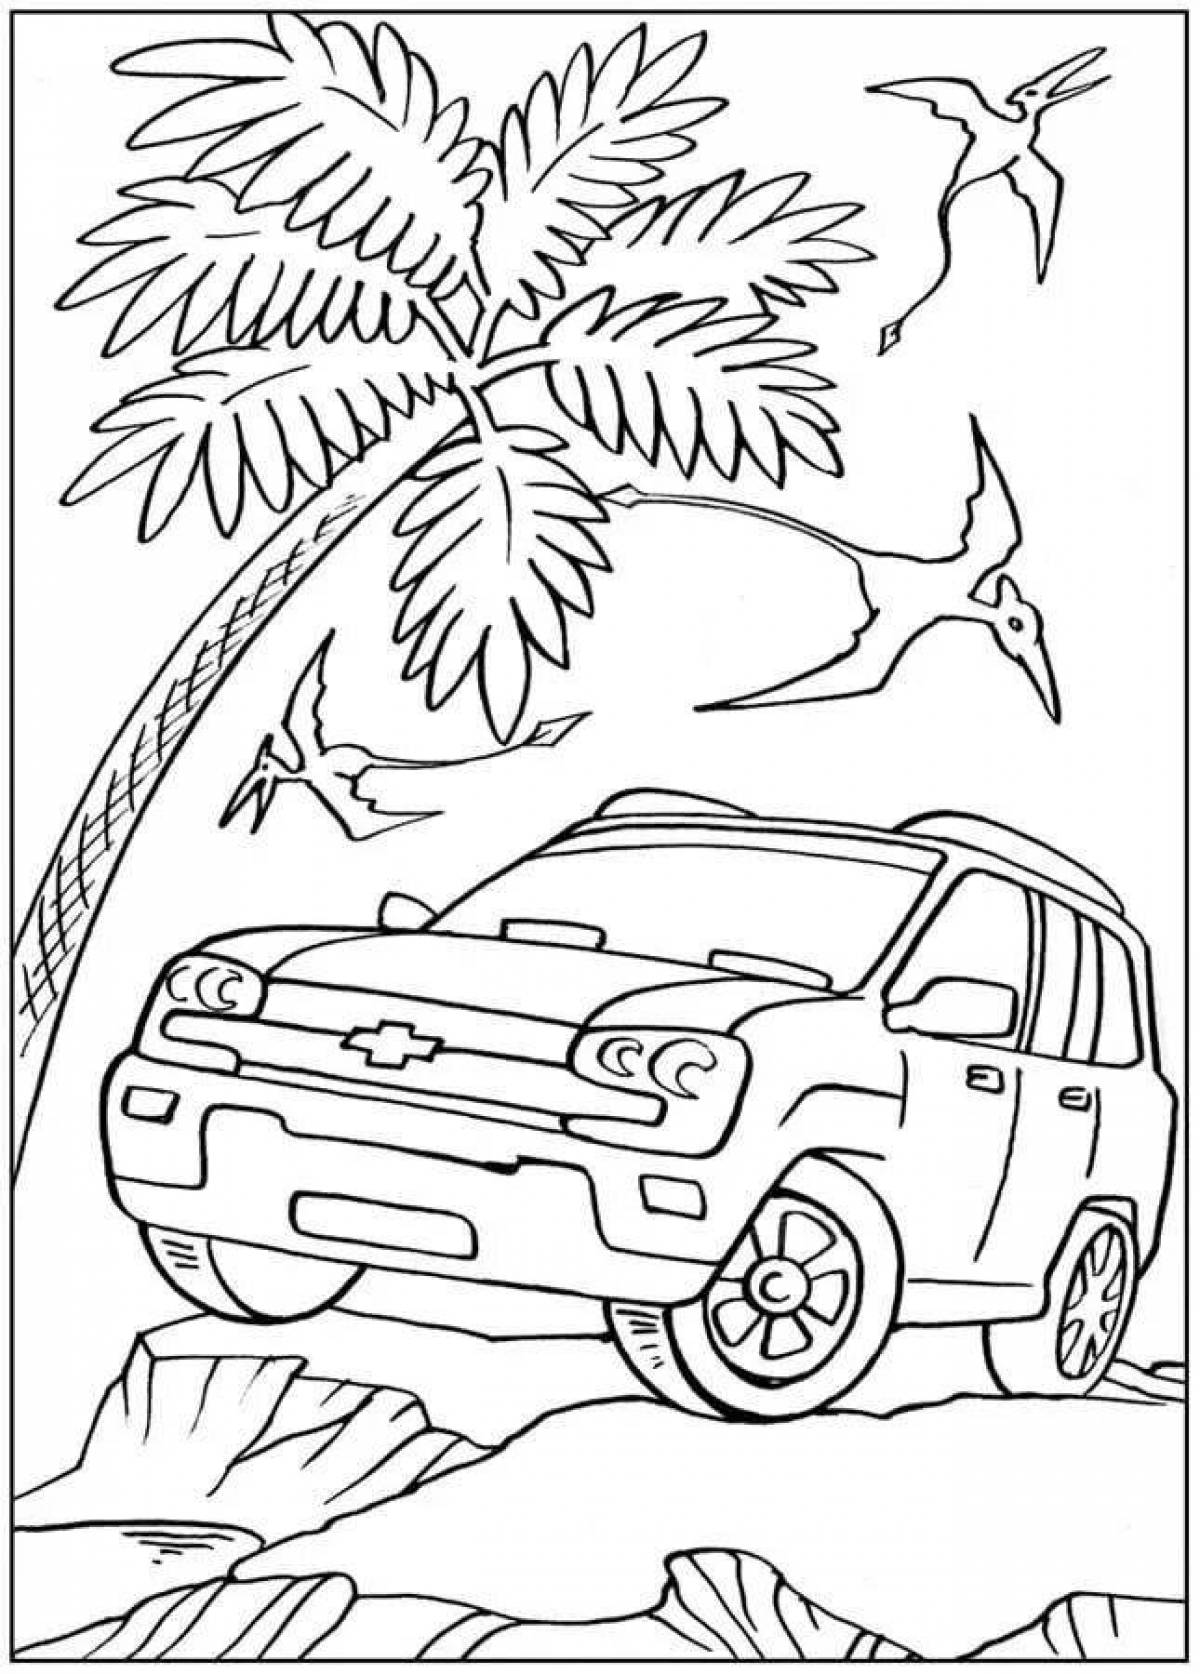 Color-frenzy coloring page for boys 9-10 years old